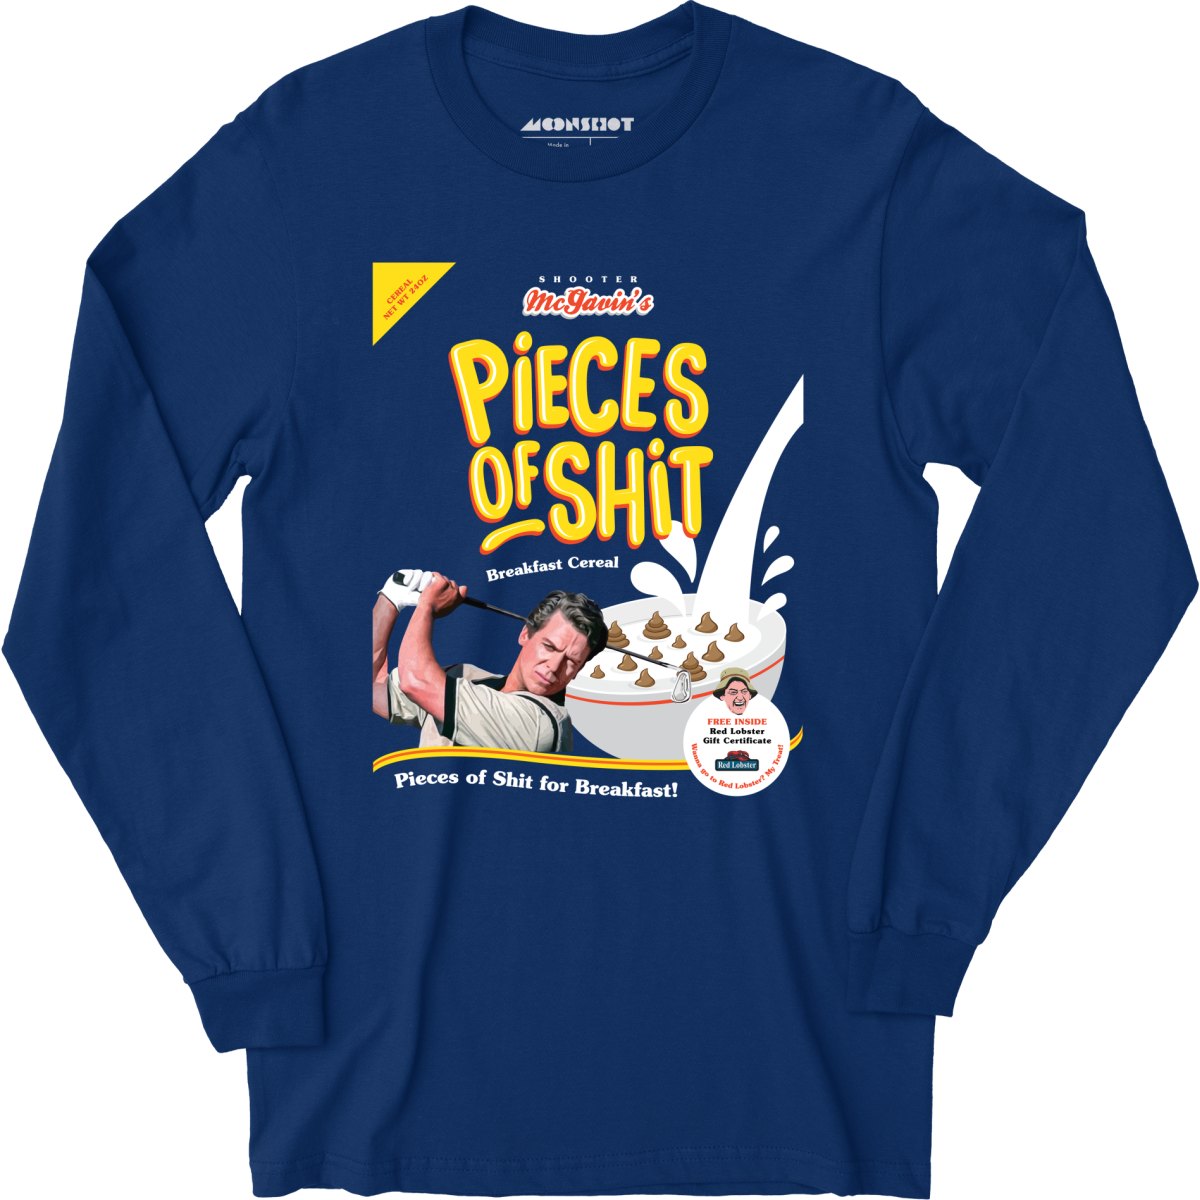 Shooter McGavin's Pieces of Shit Breakfast Cereal - Long Sleeve T-Shirt